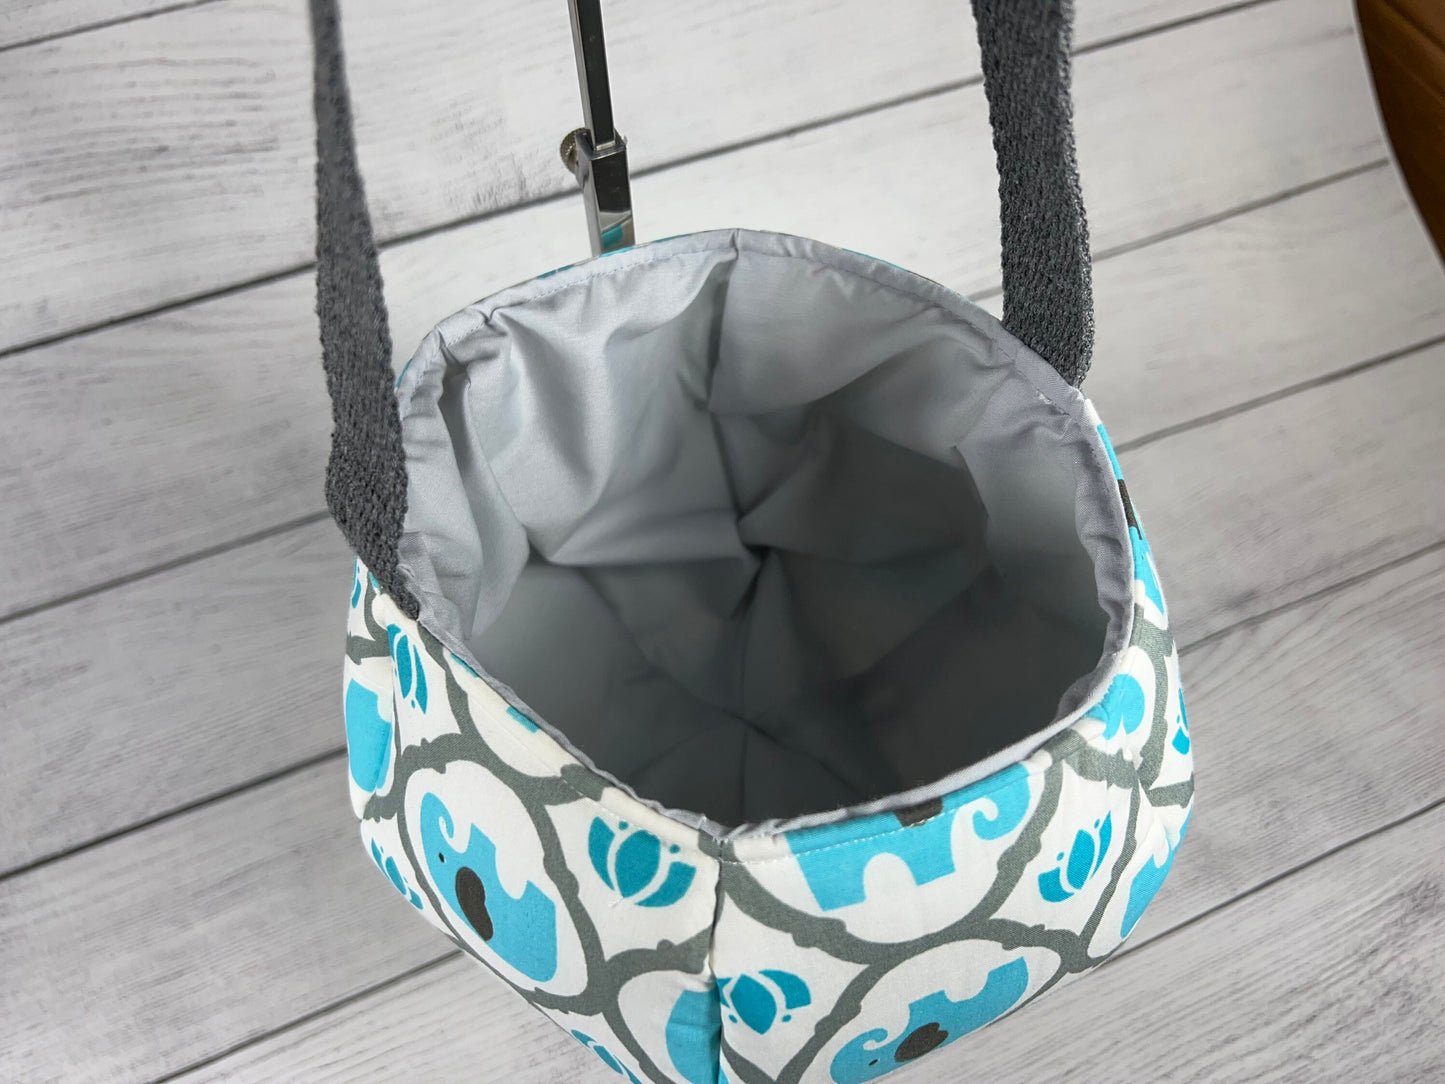 Blue and Grey Elephant Tote Bag - Bag - Tote - Animal - Zoo - Party - Gift - Everyday - Holiday - Easter - Halloween